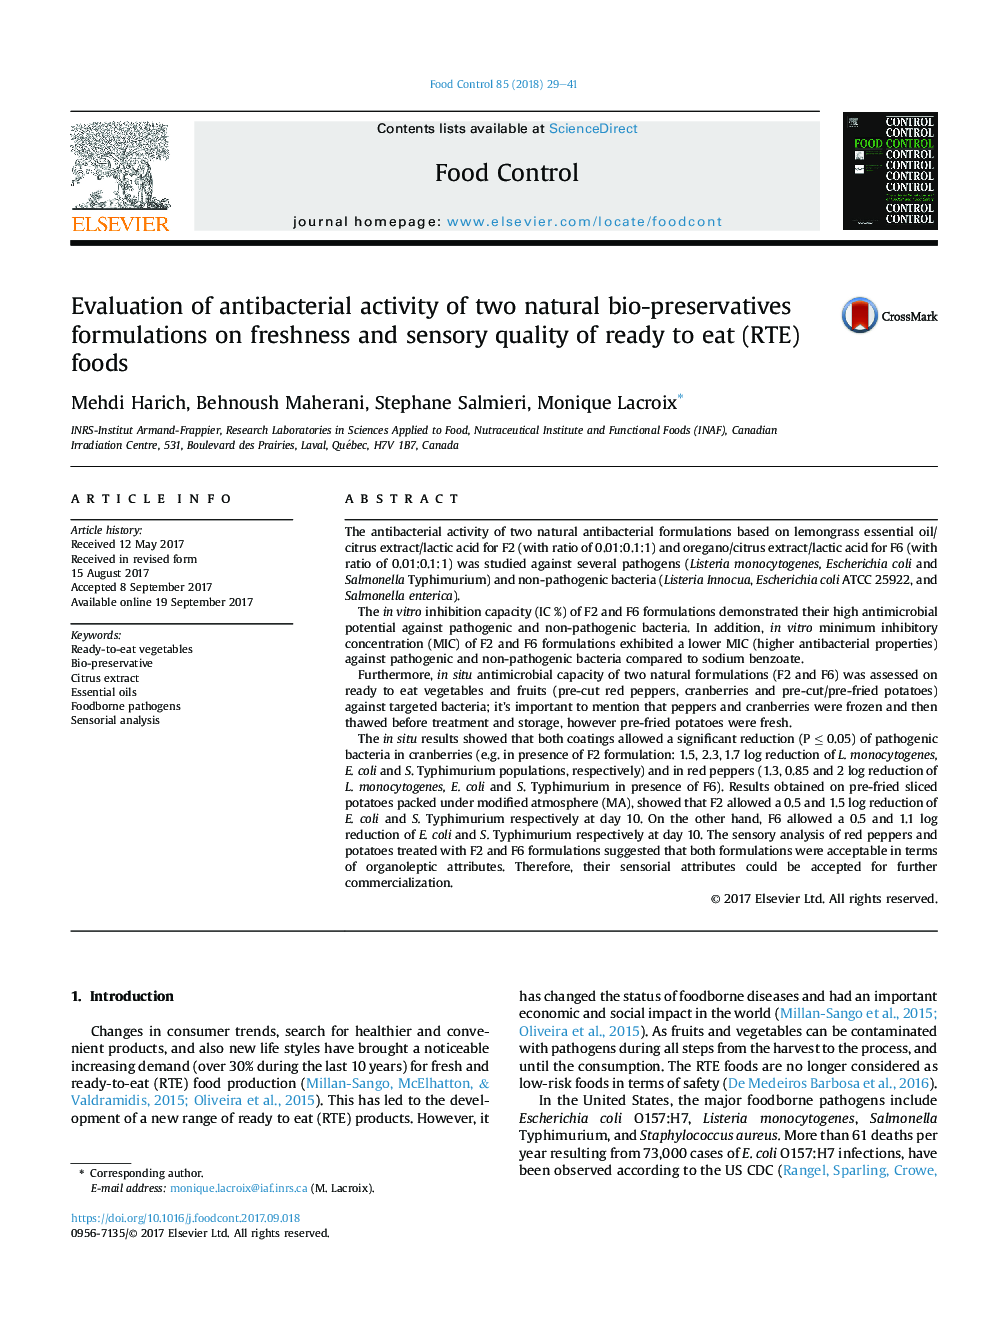 Evaluation of antibacterial activity of two natural bio-preservatives formulations on freshness and sensory quality of ready to eat (RTE) foods